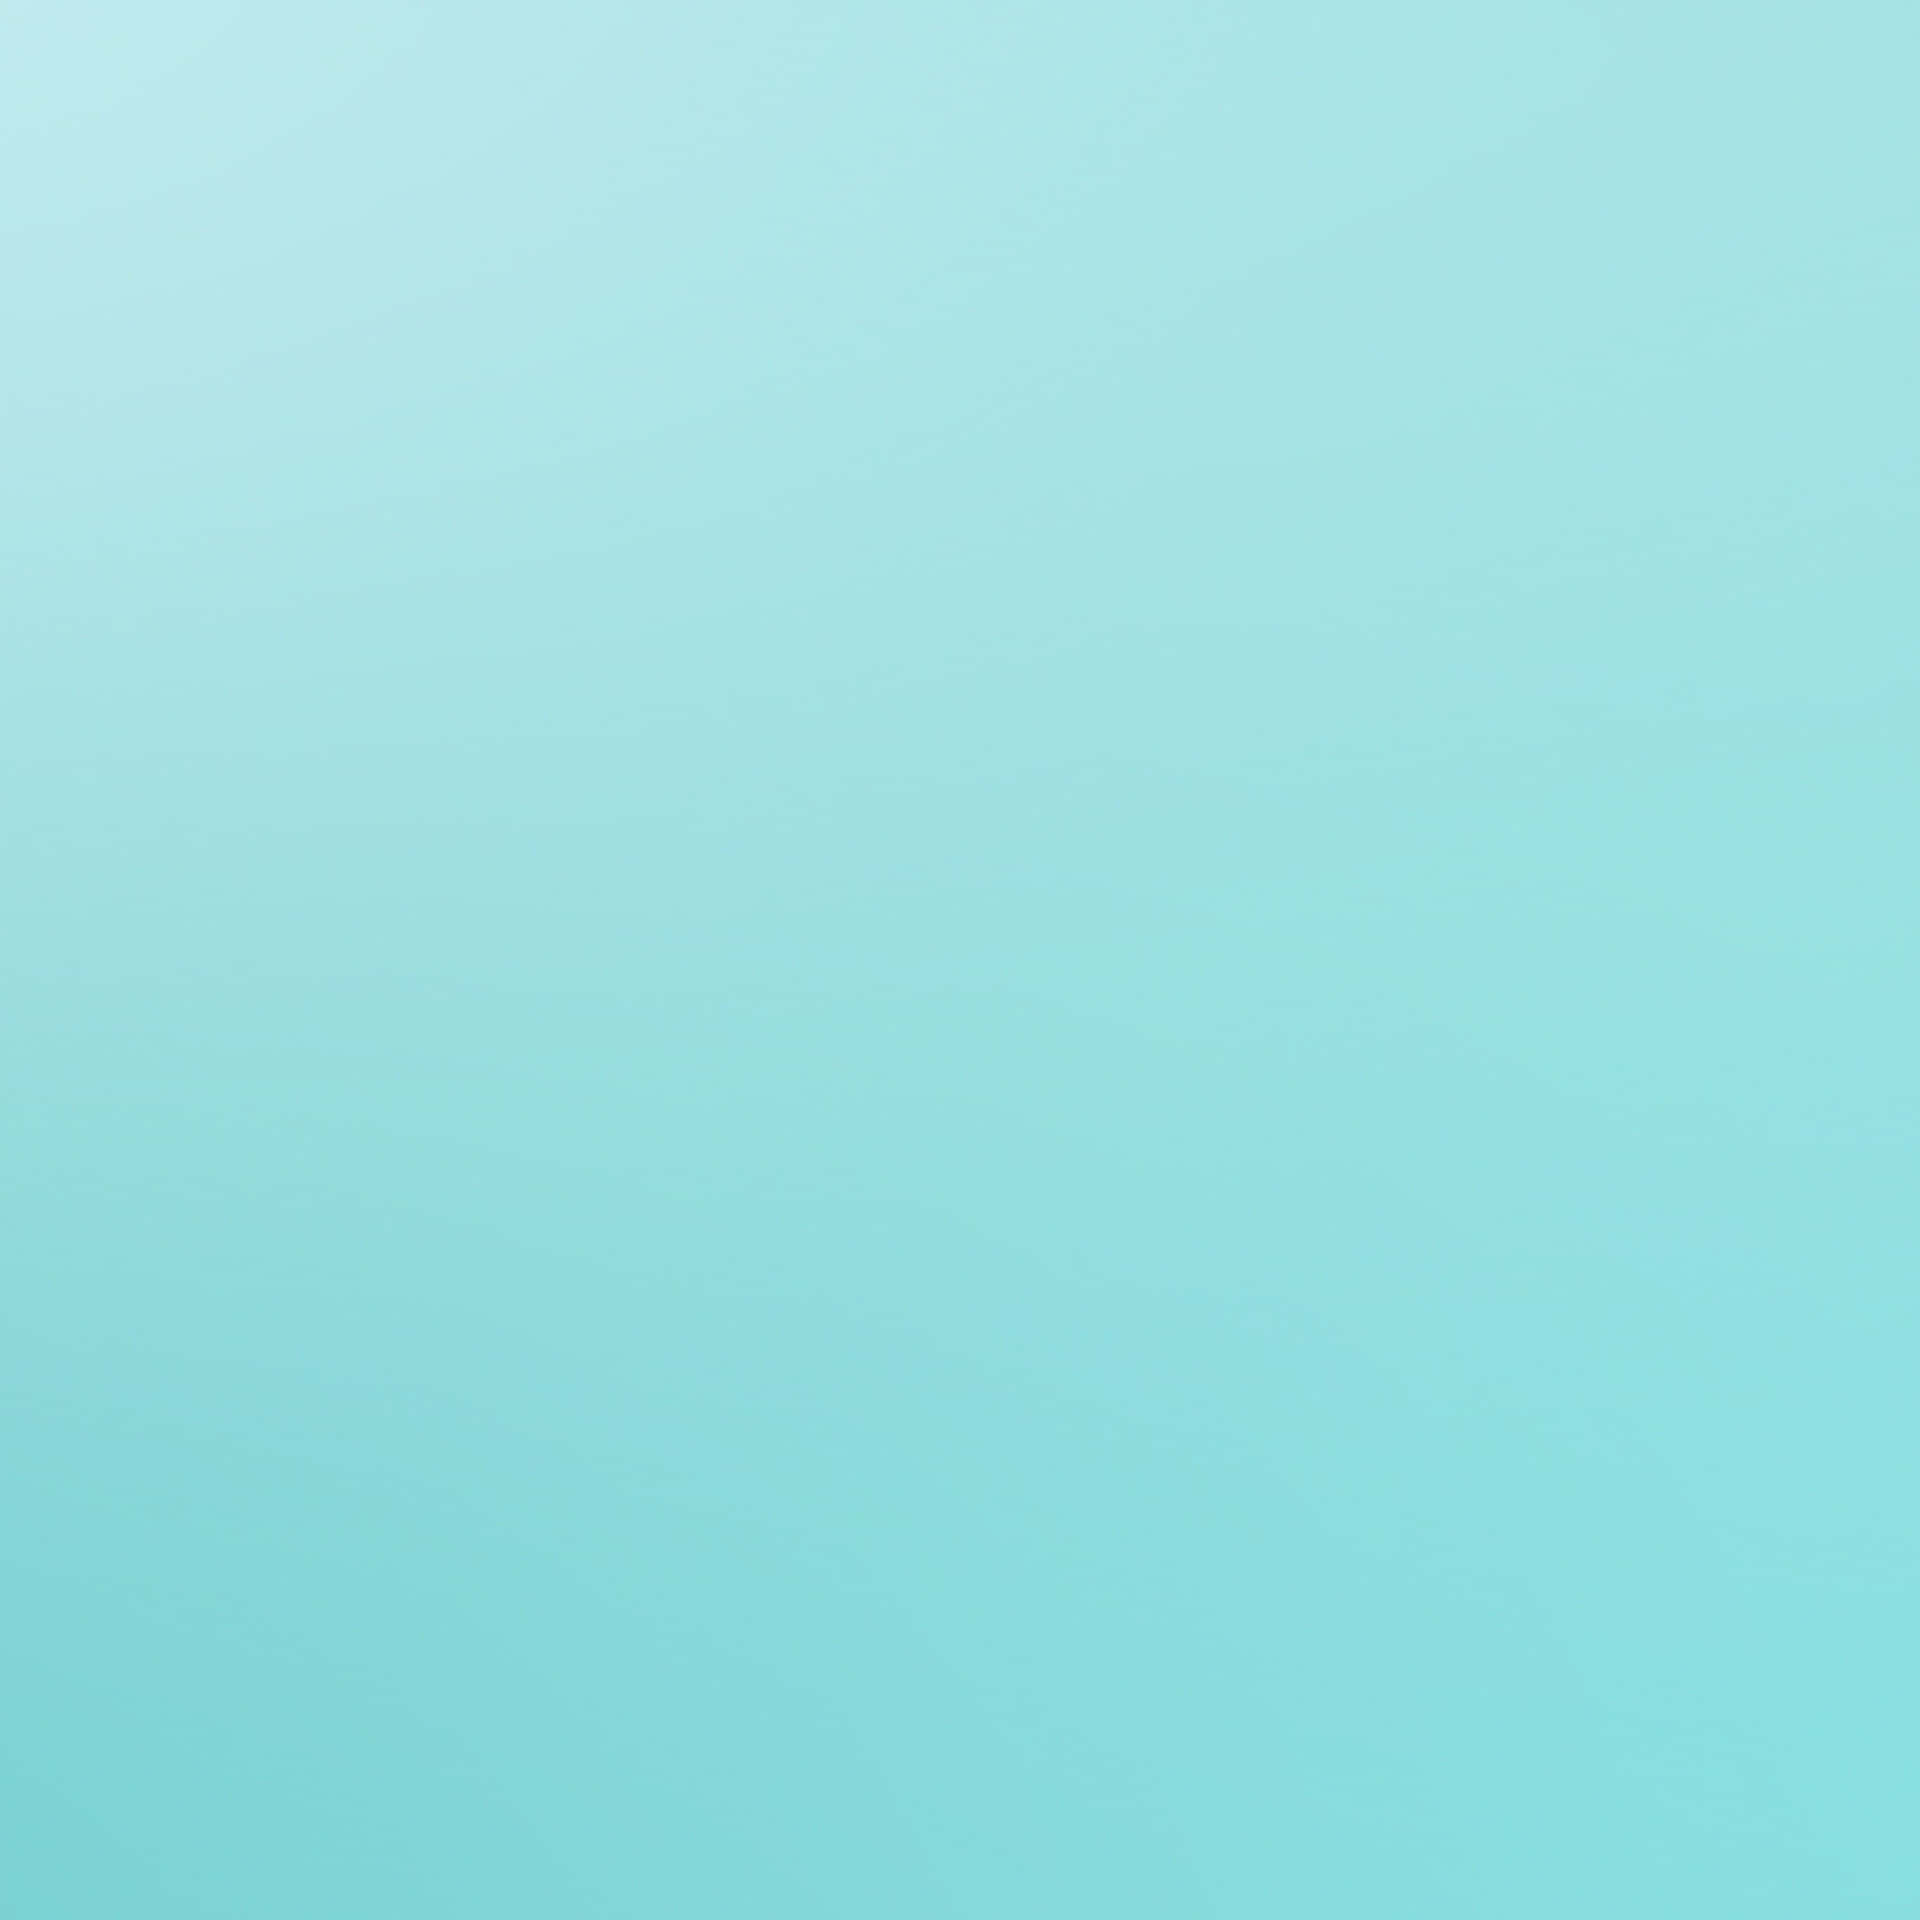 Light Teal Abstract Background